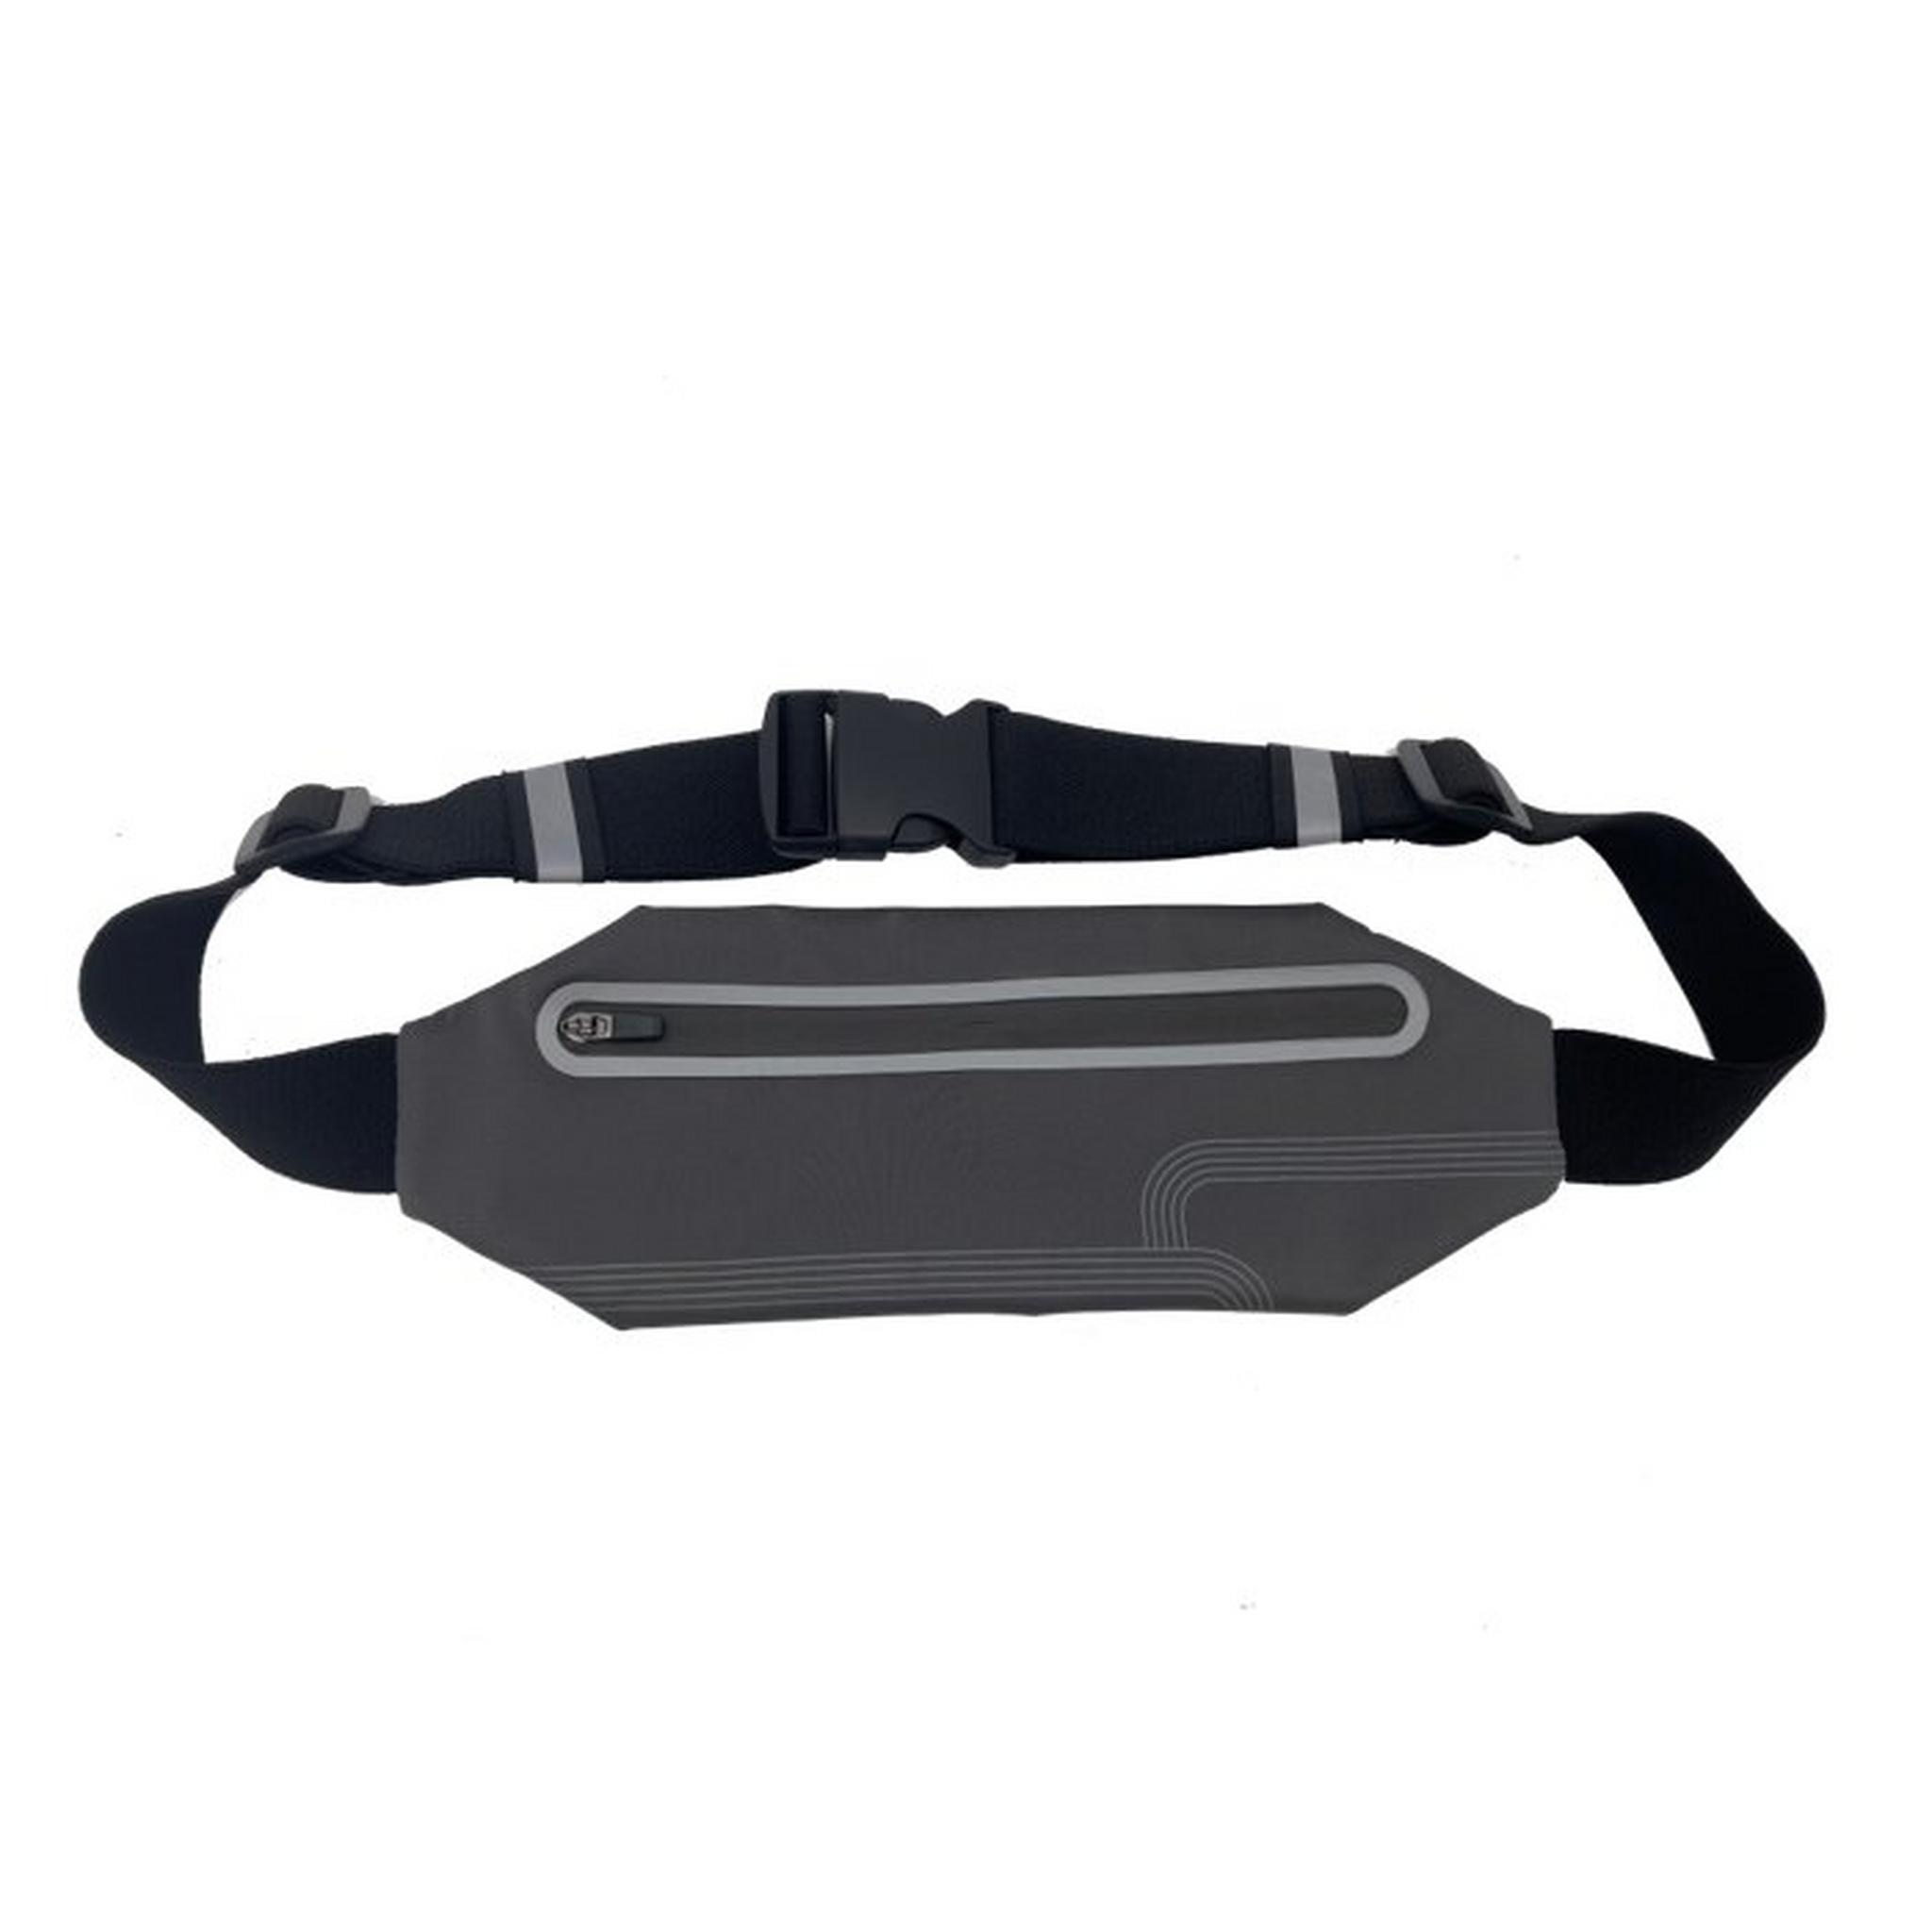 Huawei Sports Fanny Pack For Matepad,HW226 - Grey